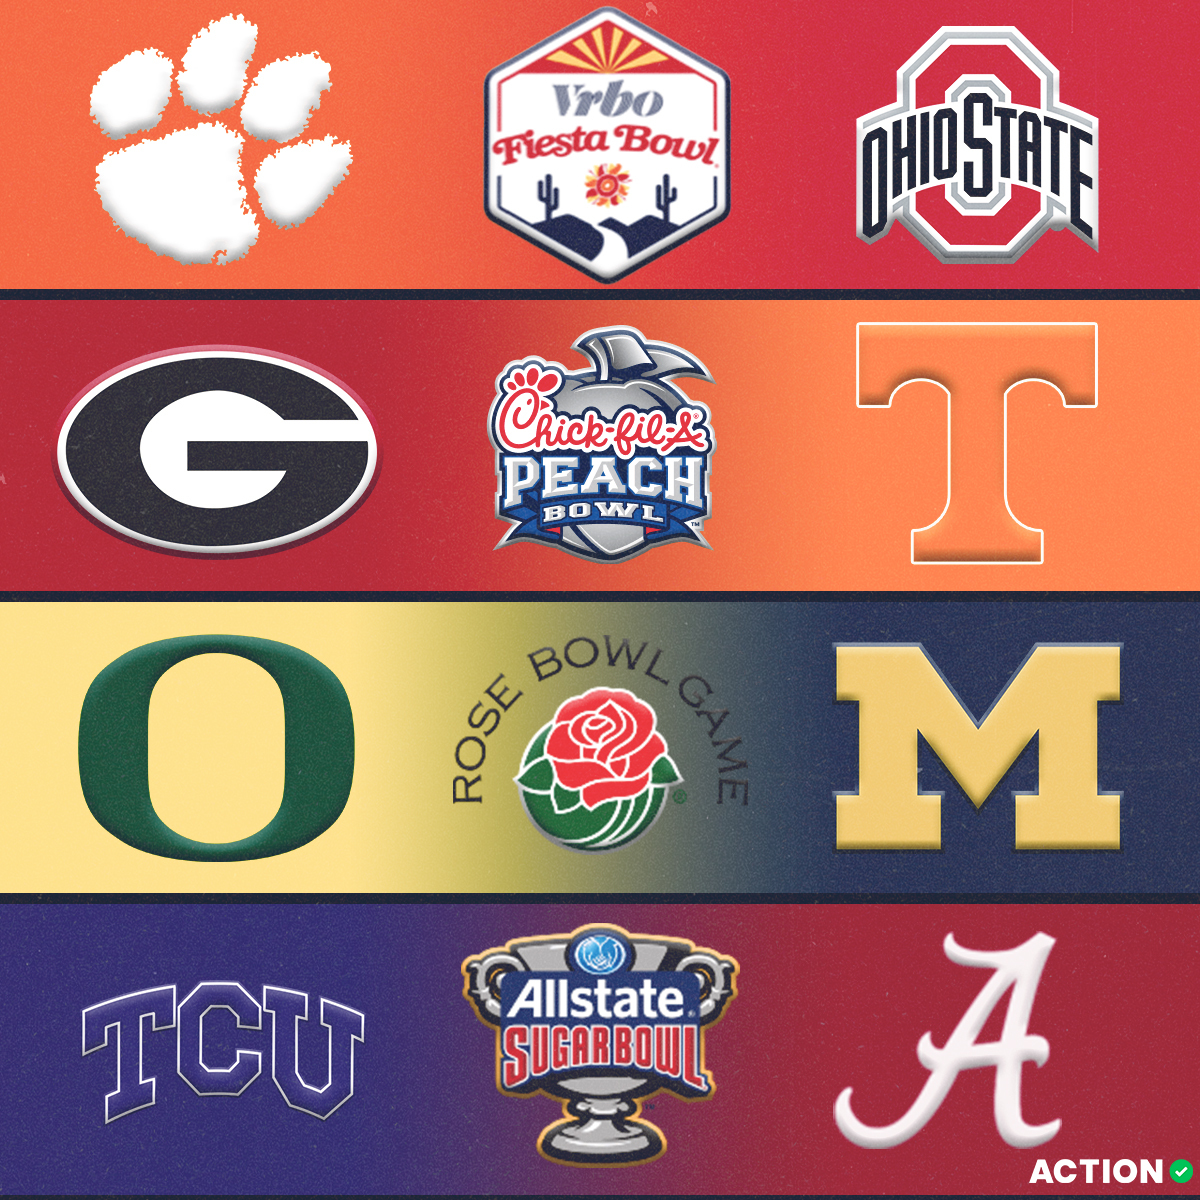 My new bowl projections for @ActionNetworkHQ include Penn State-Ole Miss (Citrus), FSU-Maryland (Duke's Mayo), USC-Kansas State (Alamo). In all, 27 teams bowl-eligible, but still on pace for record number of teams in bowls w/losing records this season actionnetwork.com/ncaaf/college-…